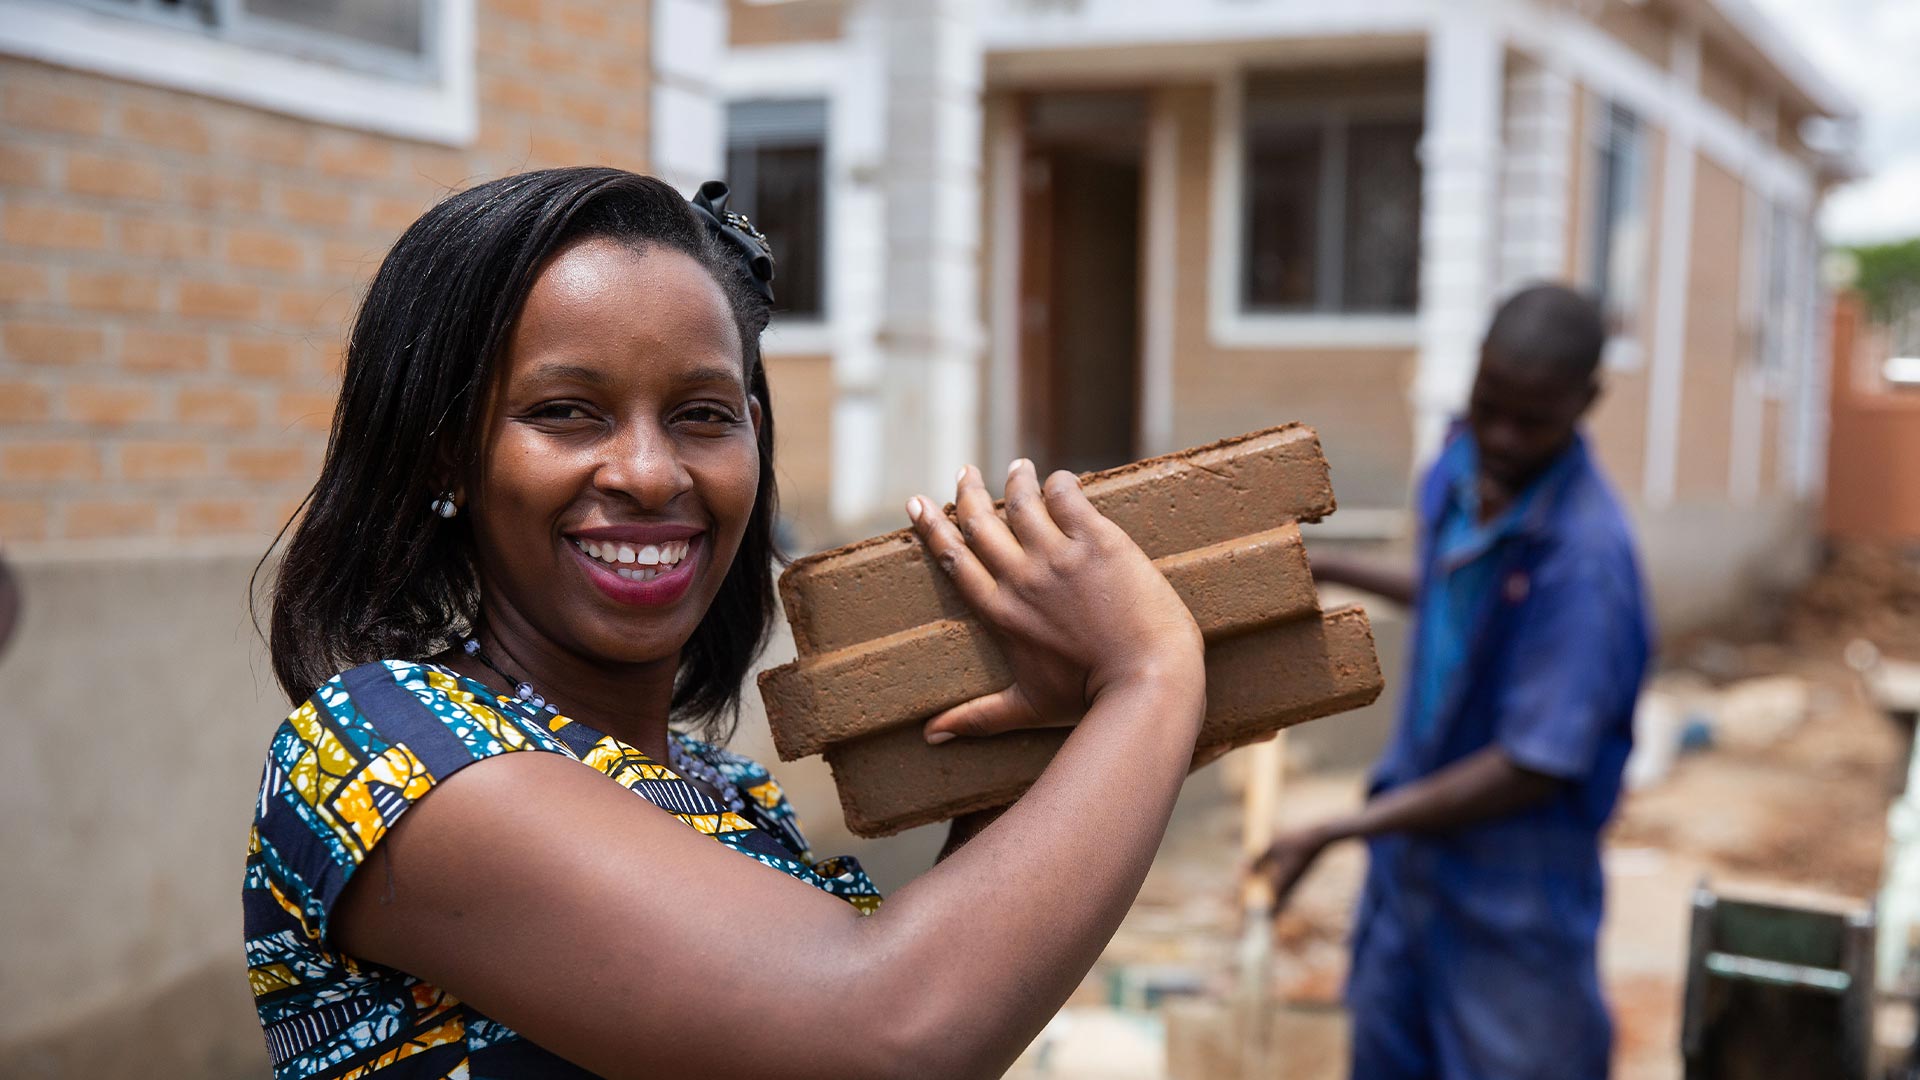 Woman carrying a brick smiling